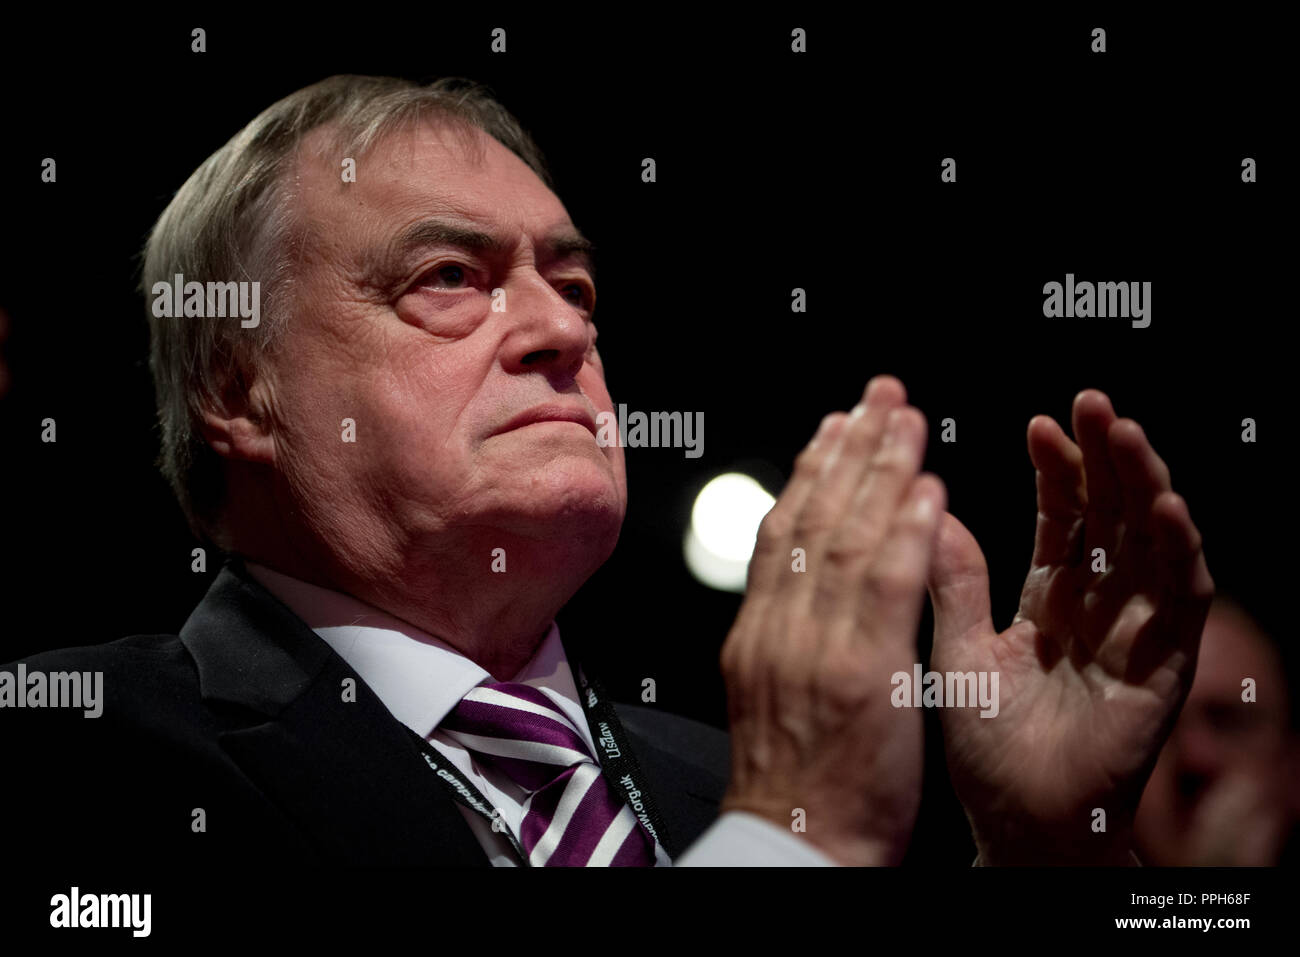 Liverpool, UK. 26th September 2018. Former Deputy Prime Minister John Prescott applauds Jeremy Corbyn's speech at the Labour Party Conference in Liverpool. © Russell Hart/Alamy Live News. Stock Photo